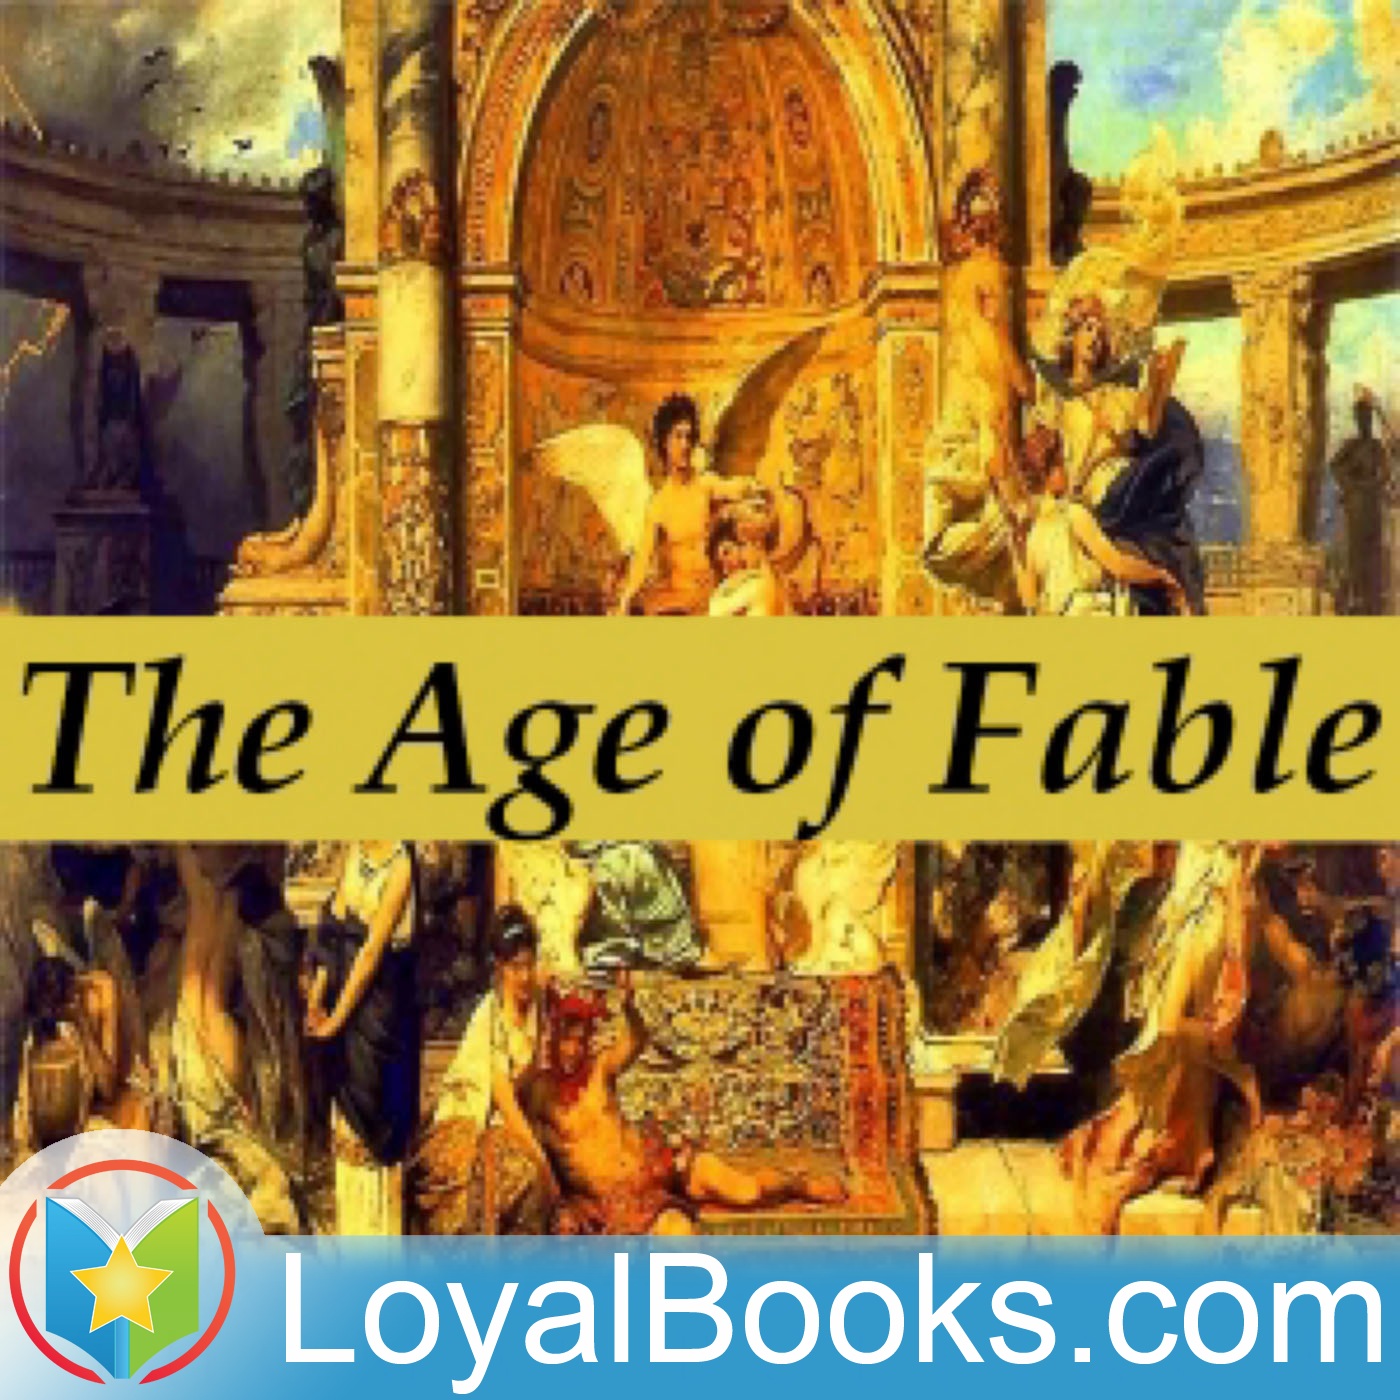 The Age of Fable: Chapter 15